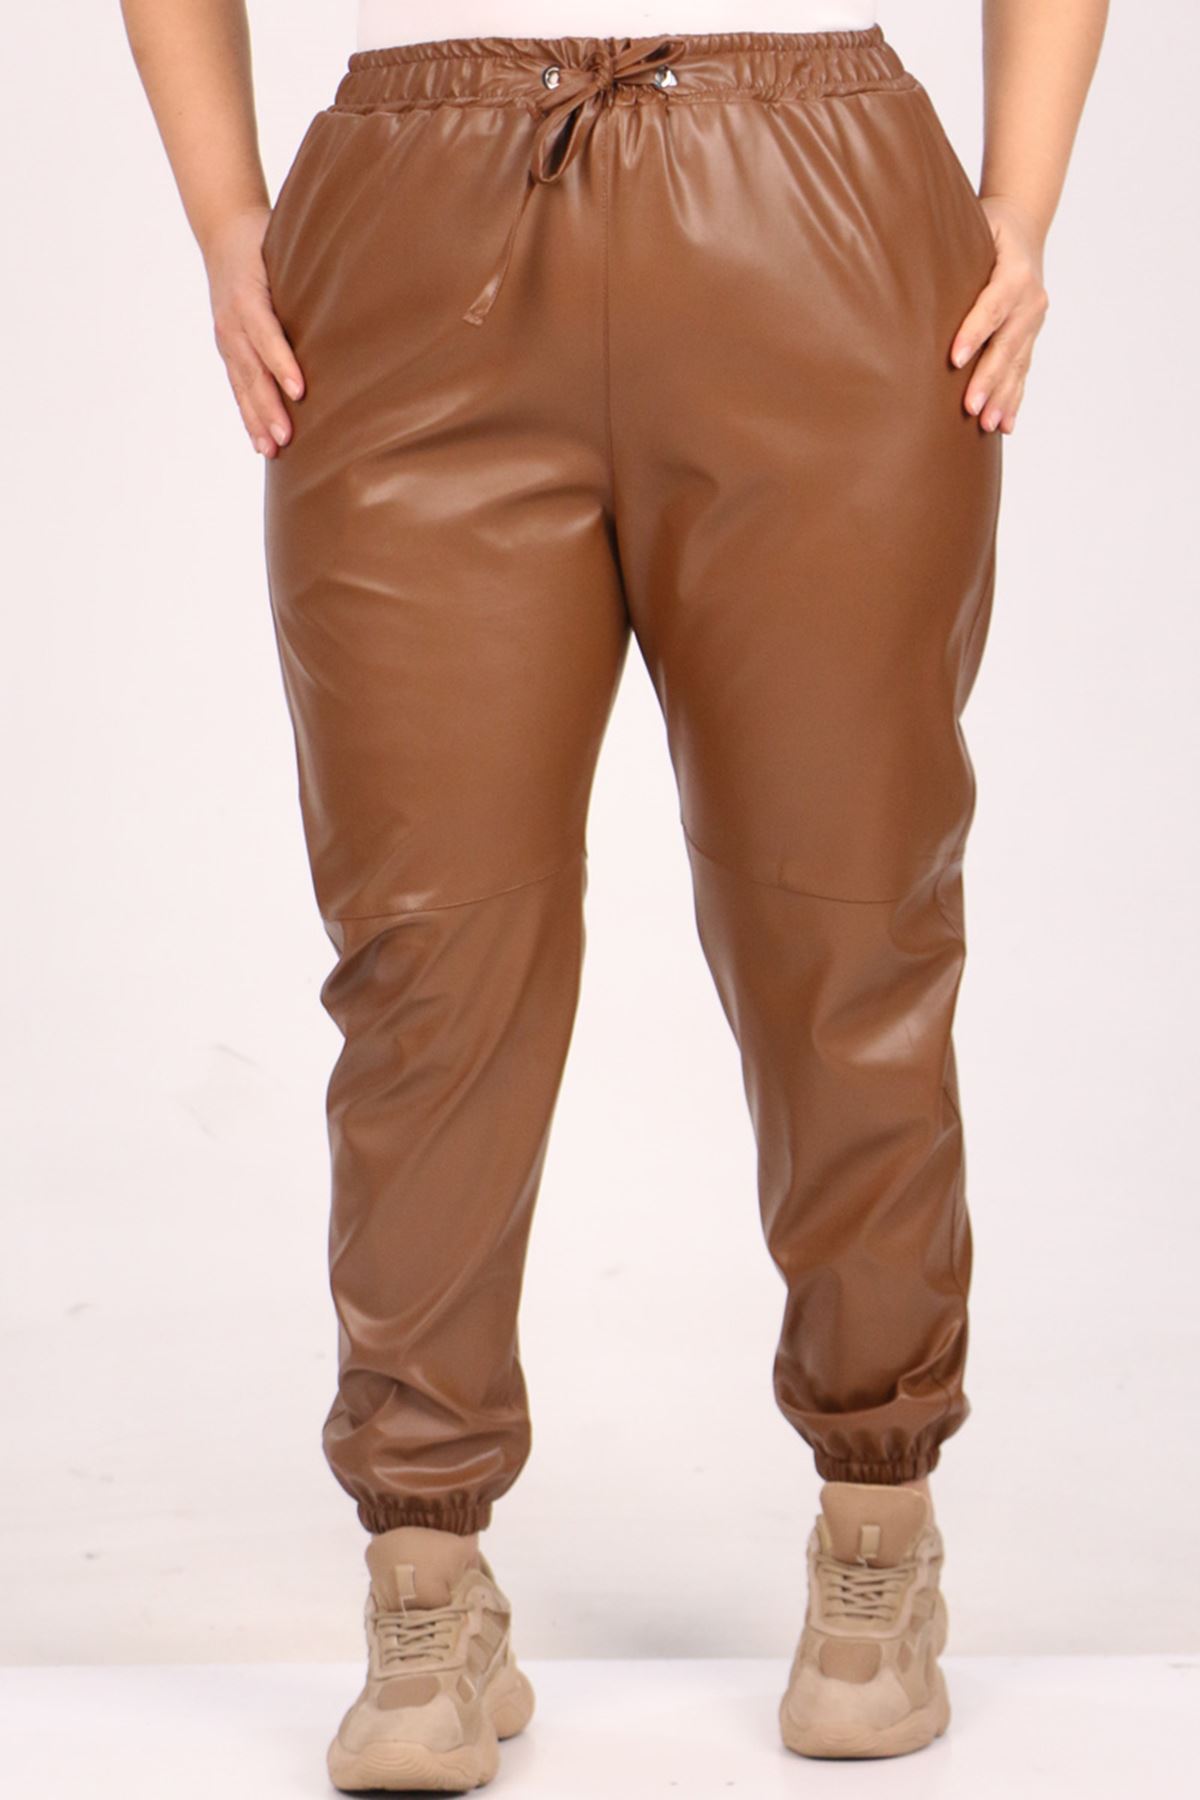 39051 Large Size Leather Trousers with Elastic Legs-Chocolate